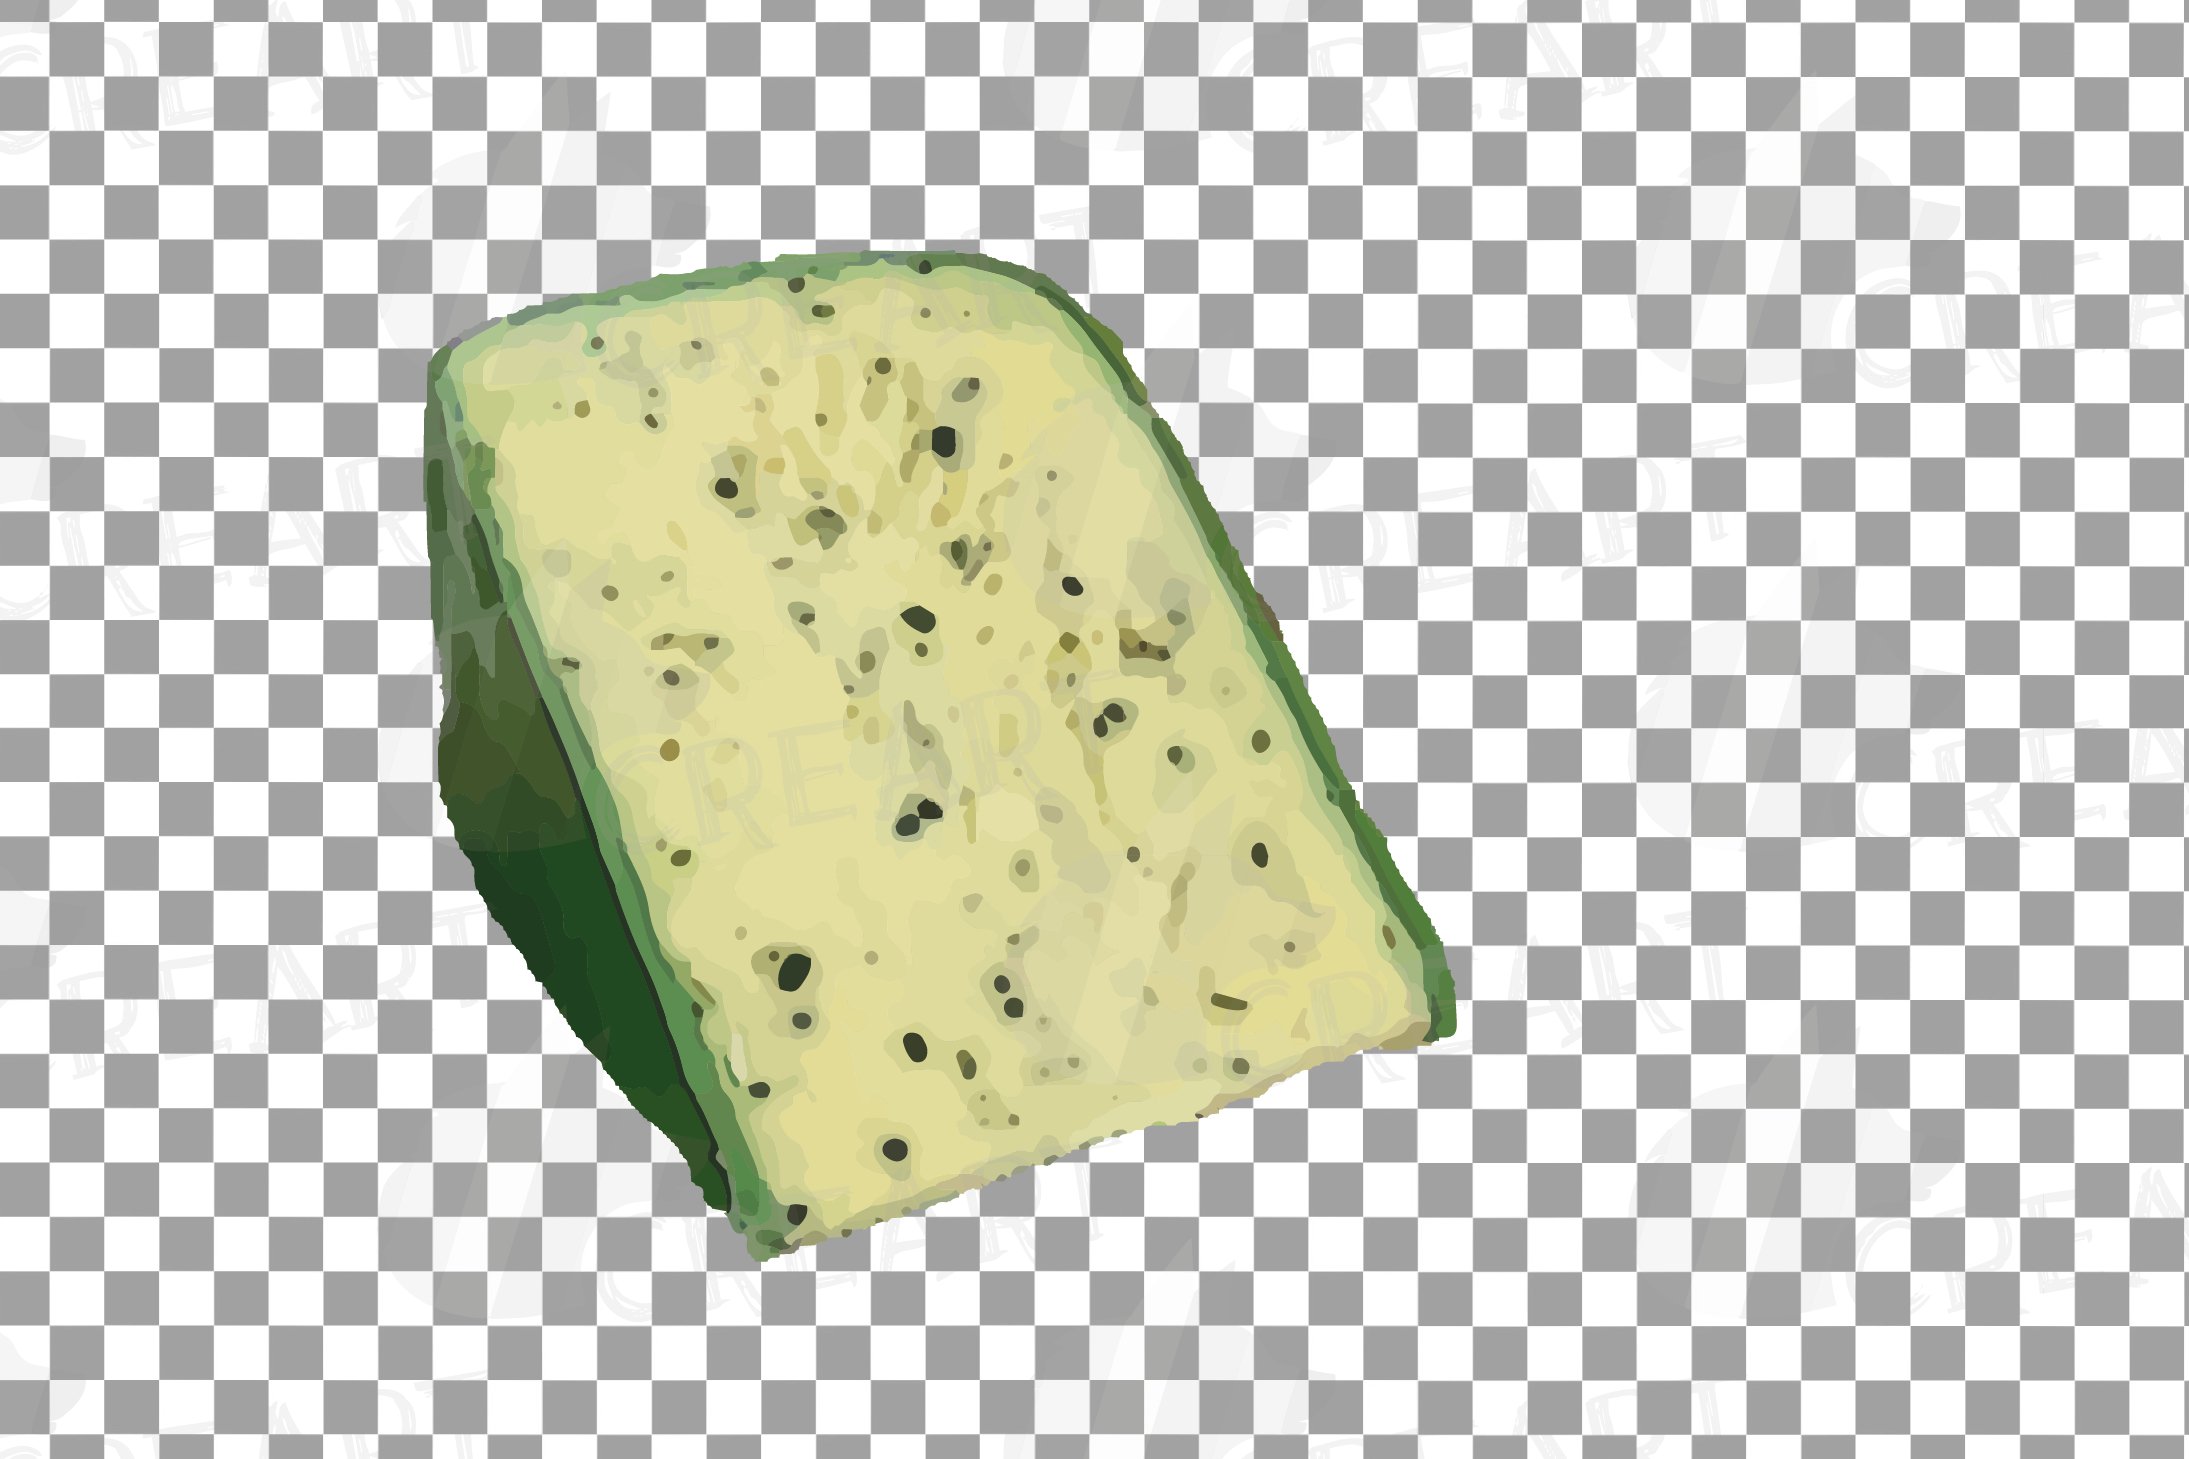 Colorful image of french cheese isolated on transparent background.